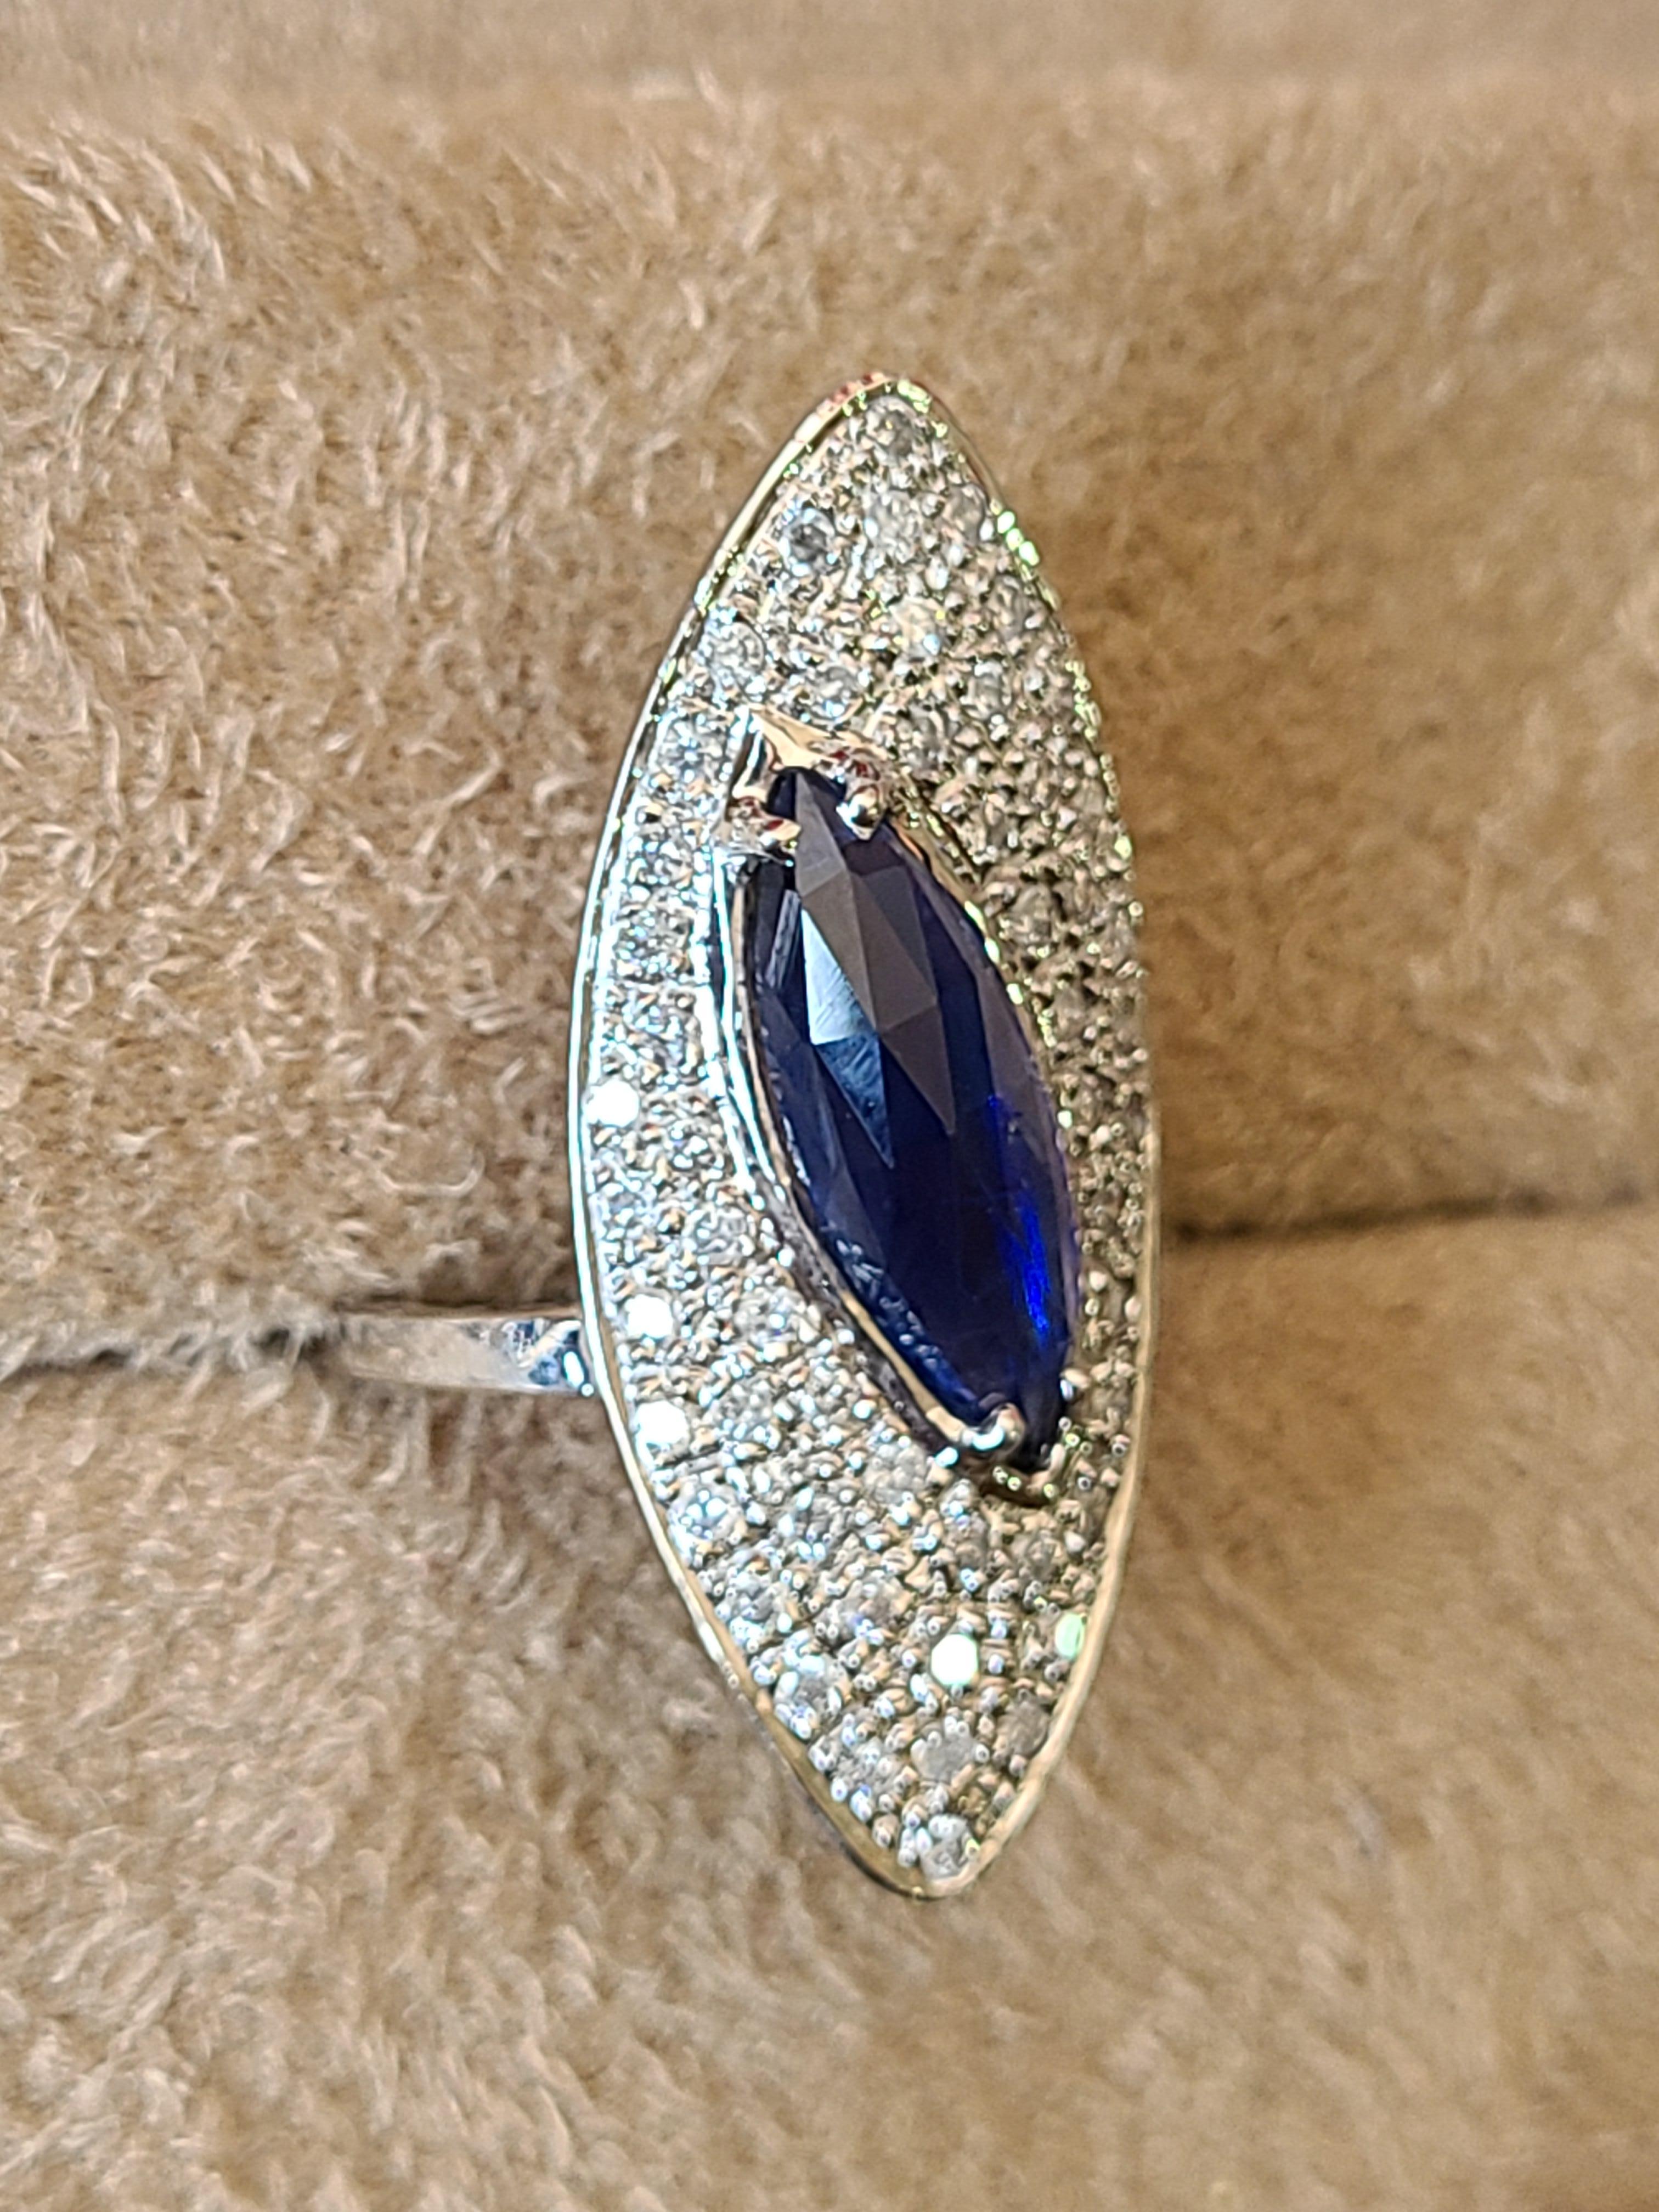 Anglo-Indian 2.92 Carat Blue Sapphire Ring Set in 18 Karat Gold with Diamonds